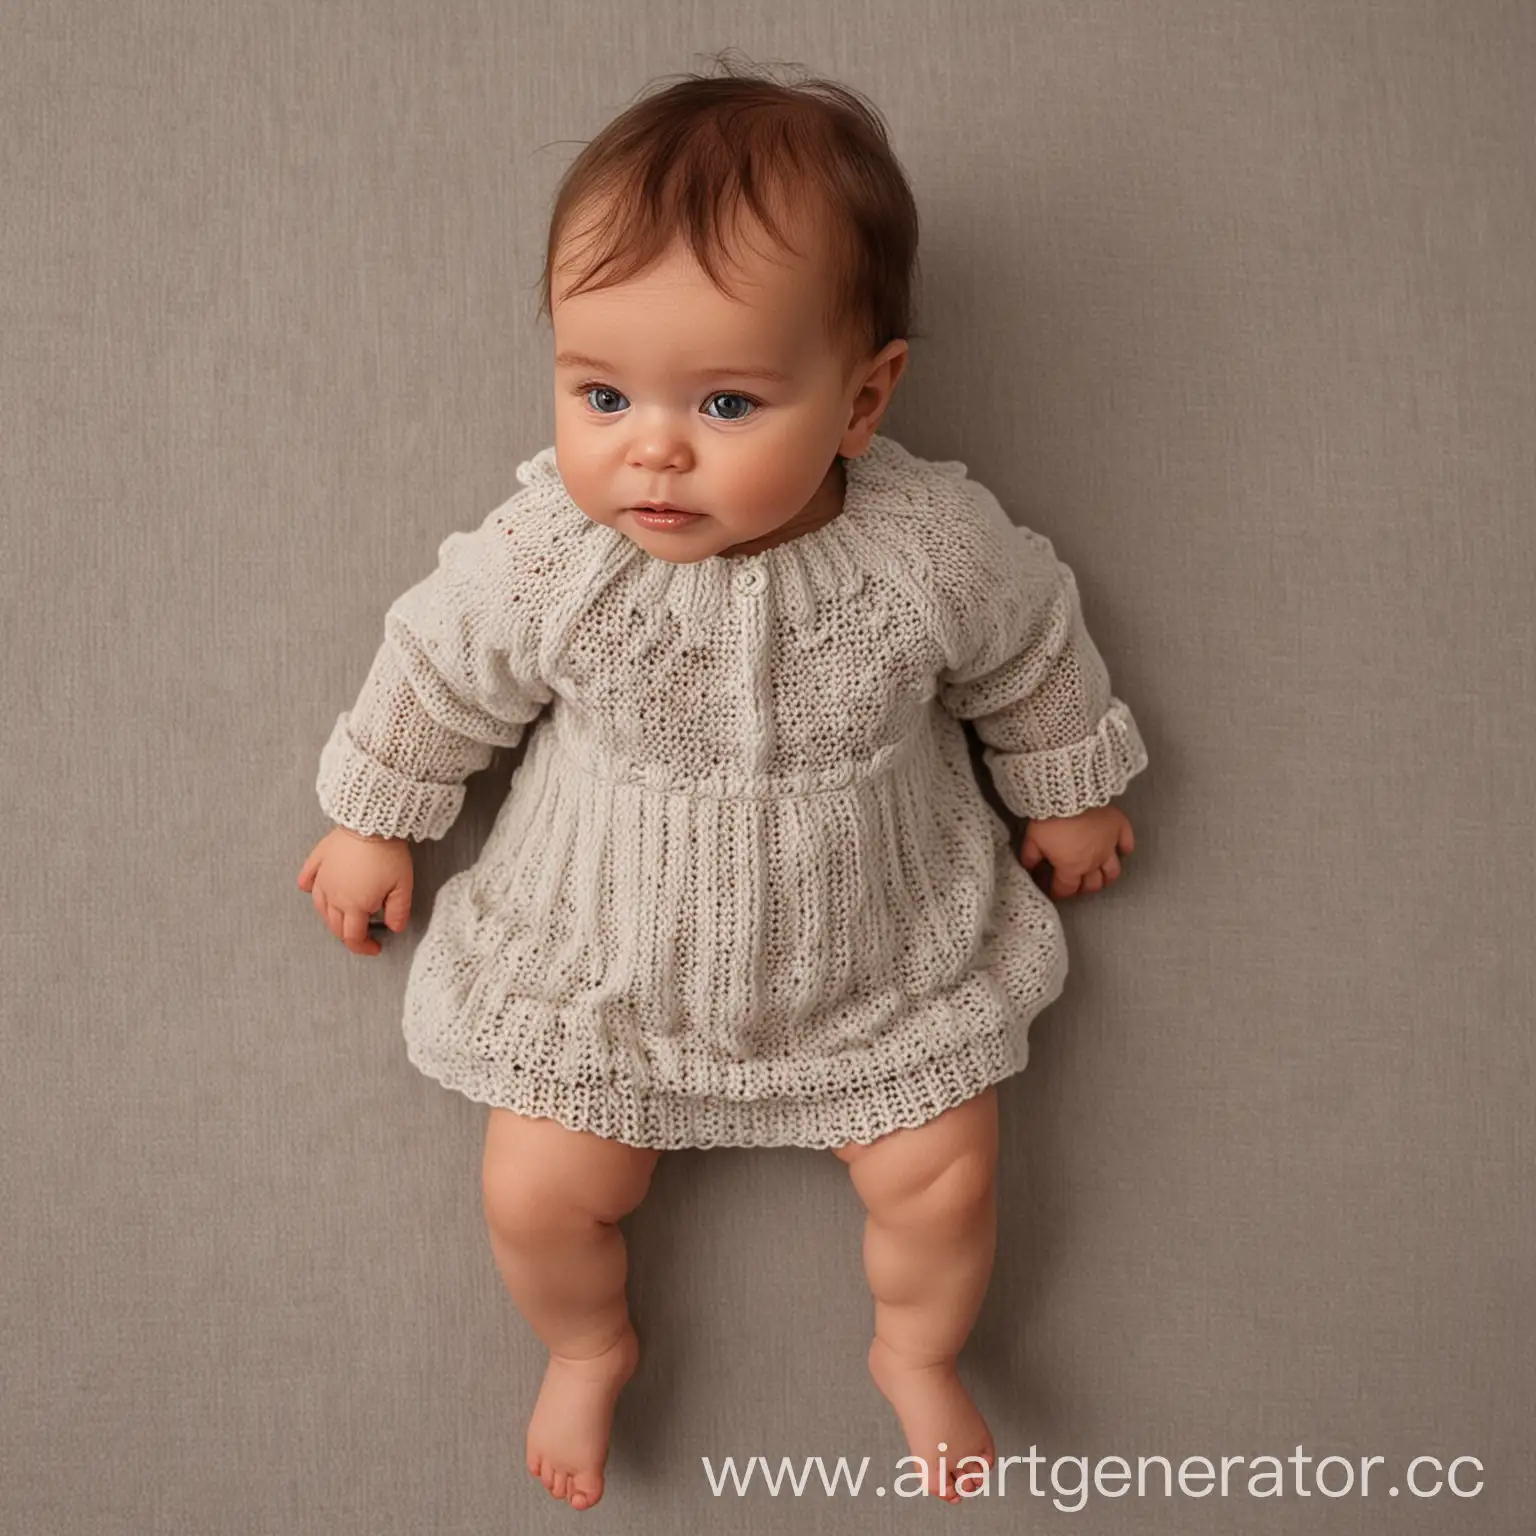 Adorable-Baby-in-a-Cozy-Knitted-Dress